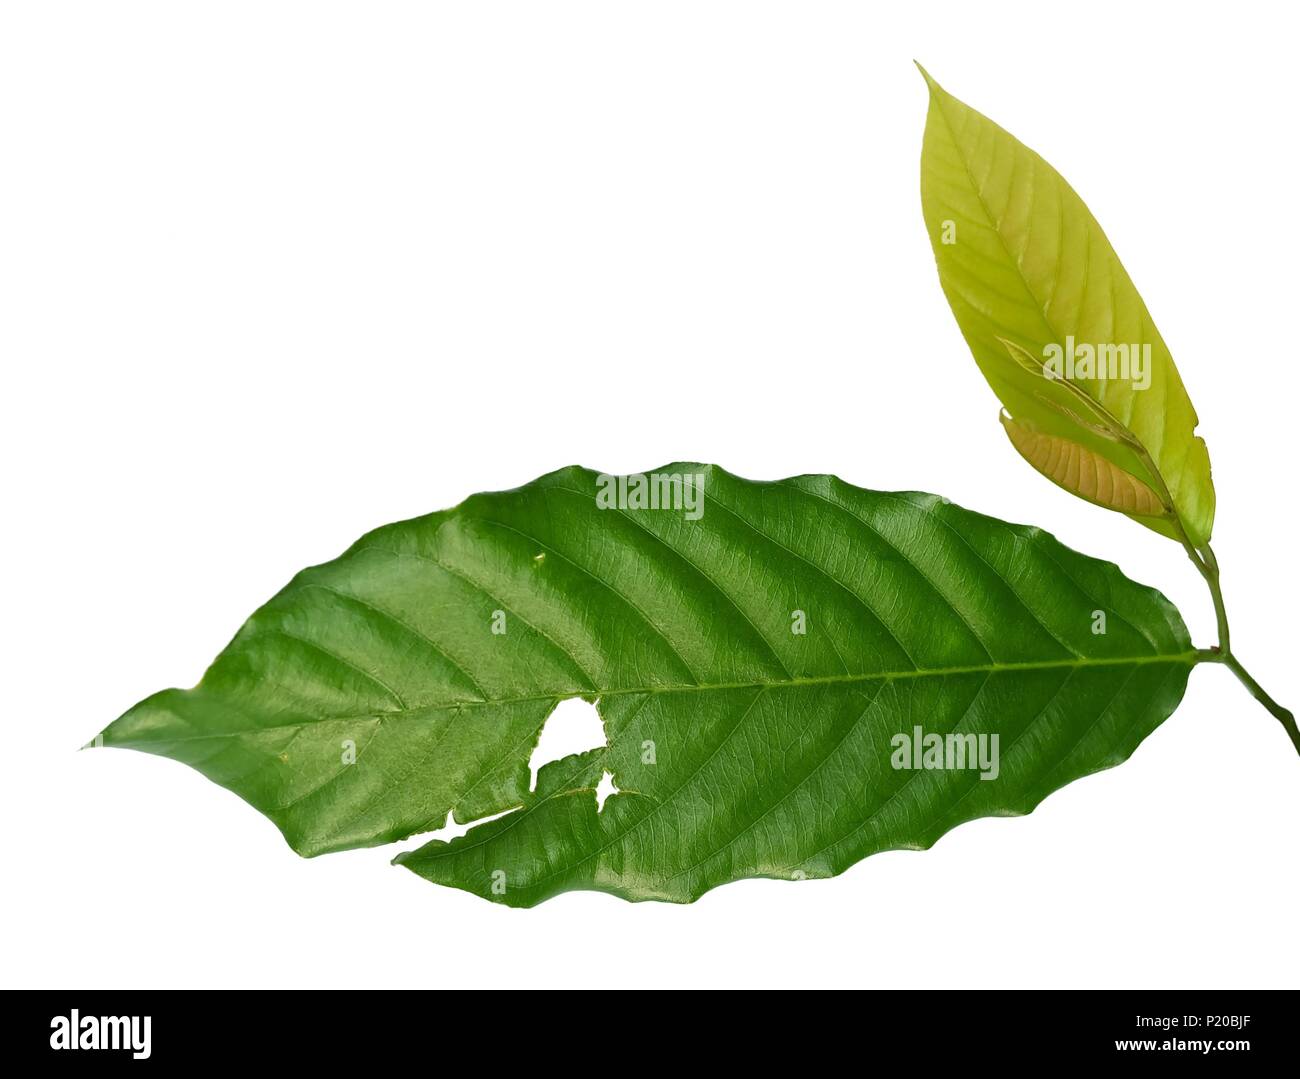 Close Up of Beautiful Fresh Green Leaf with Holes Damage from Insects Isolated on A White Background. Stock Photo